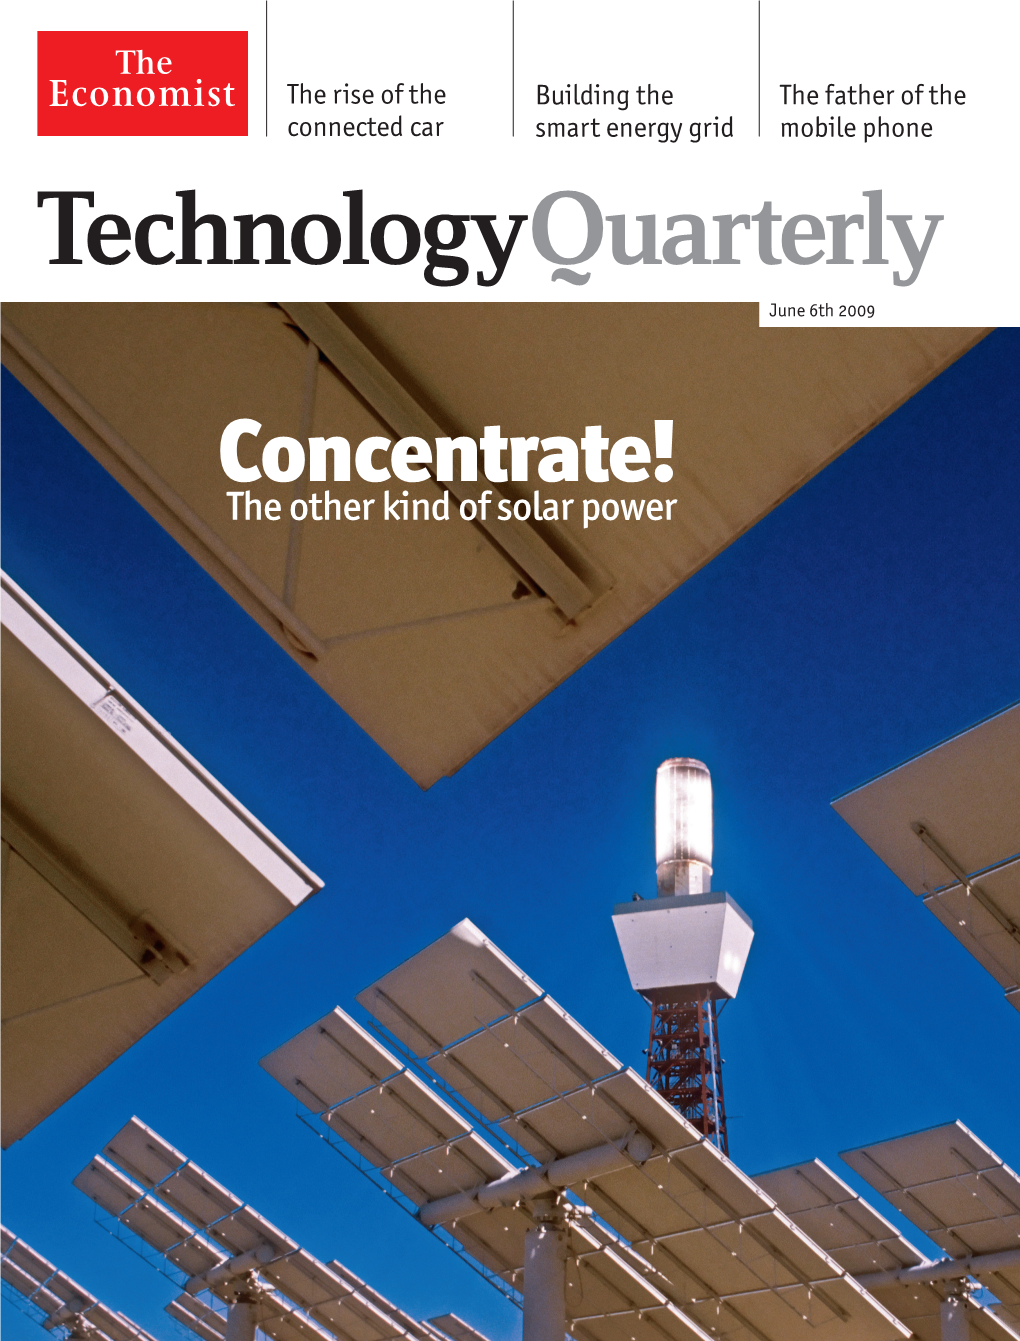 Technologyquarterly June 6Th 2009 Concentrate! the Other Kind of Solar Power